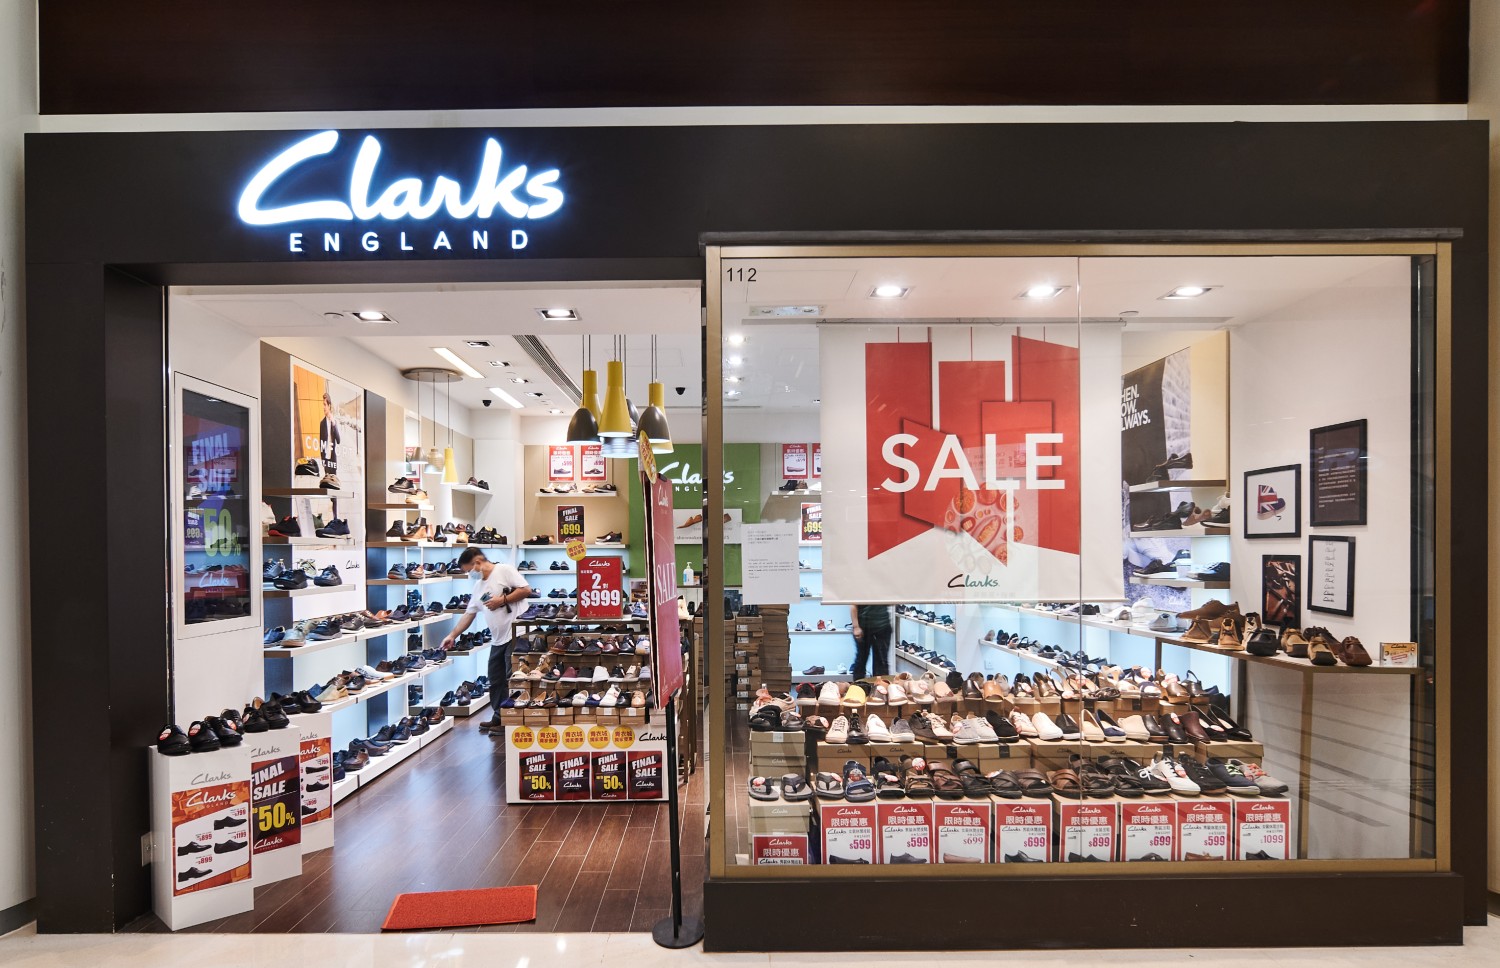 clarks voucher to use in store